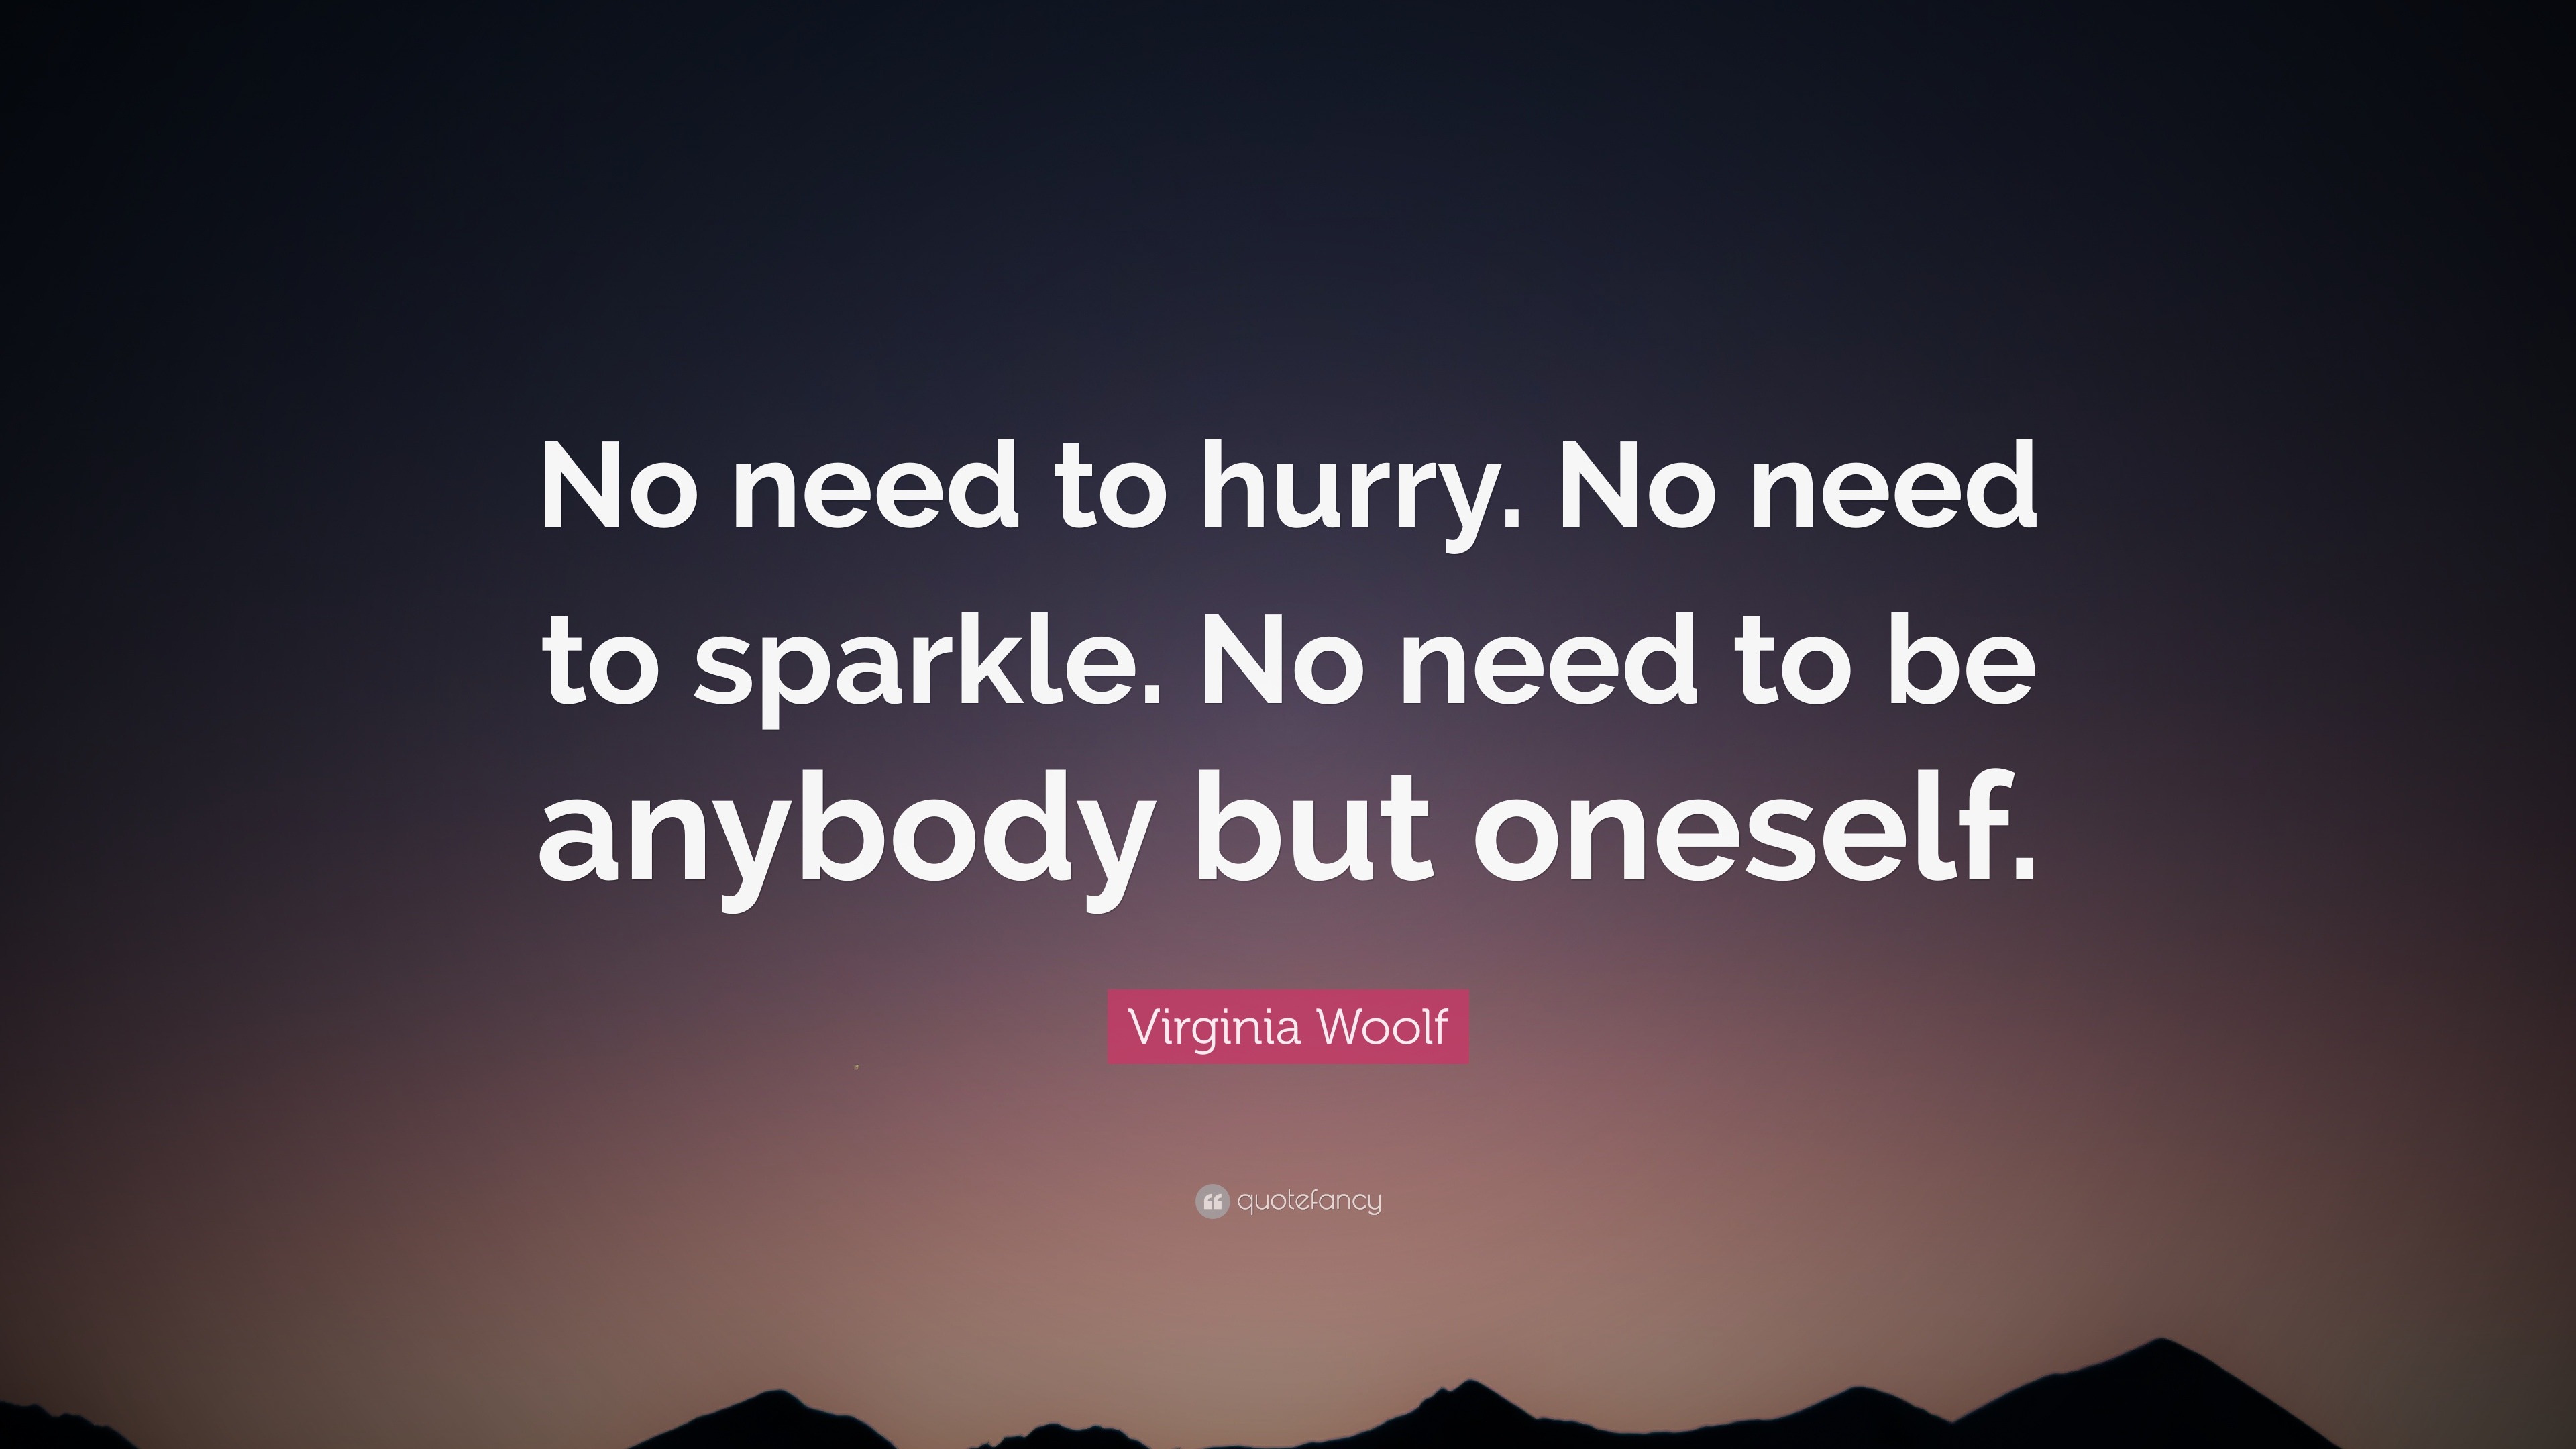 no need to hurry no need to sparkle meaning